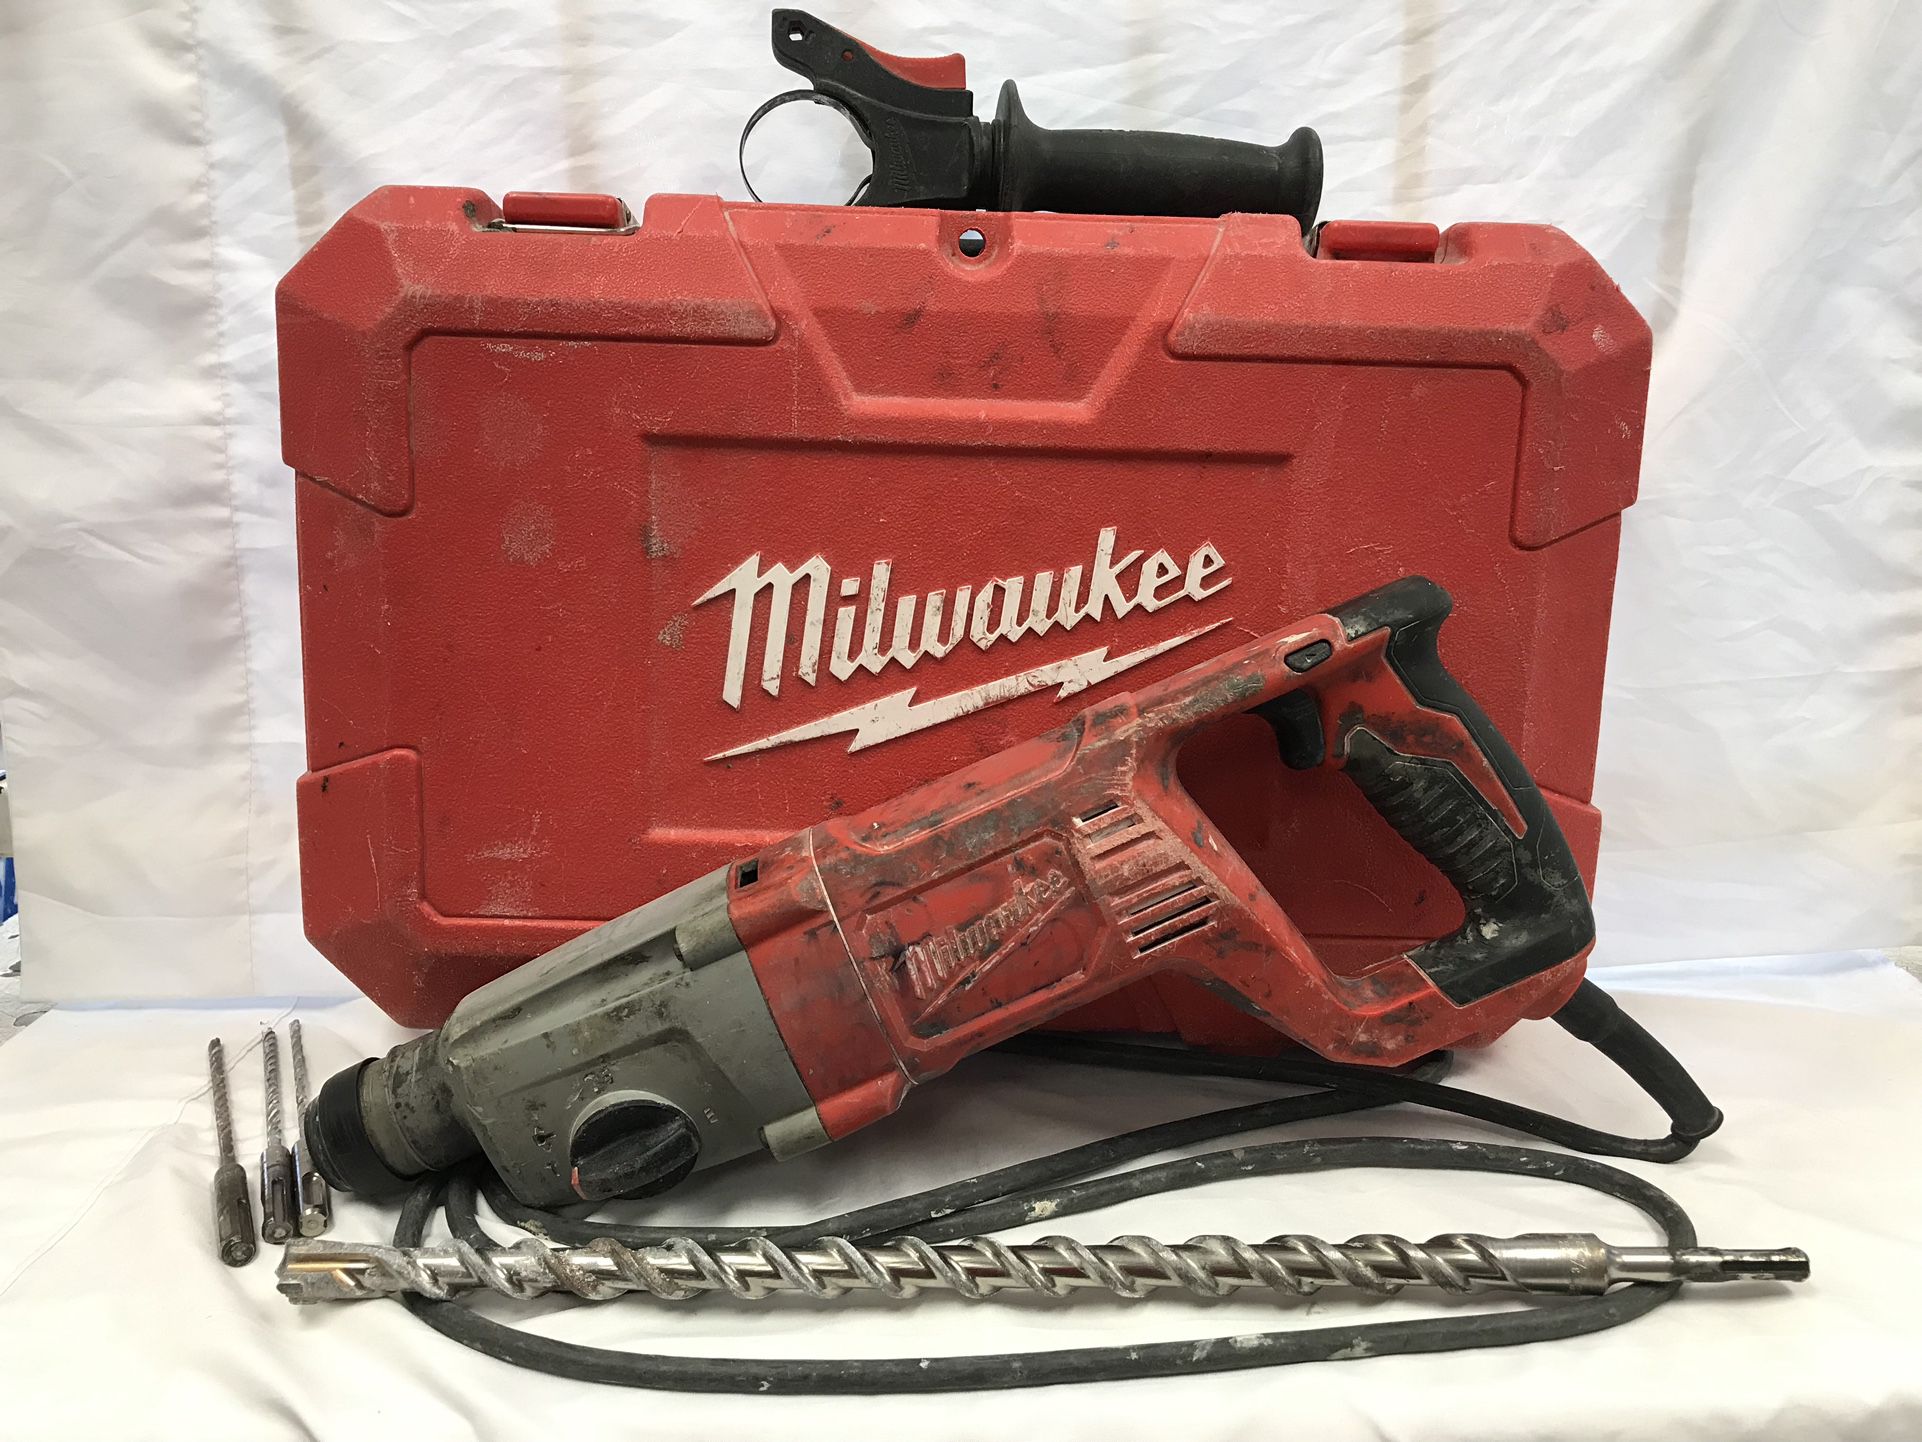 Milwaukee 5262-21 Amp Corded in. SDS D-Handle Rotary Hammer Drill with  Case for Sale in Miramar, FL OfferUp